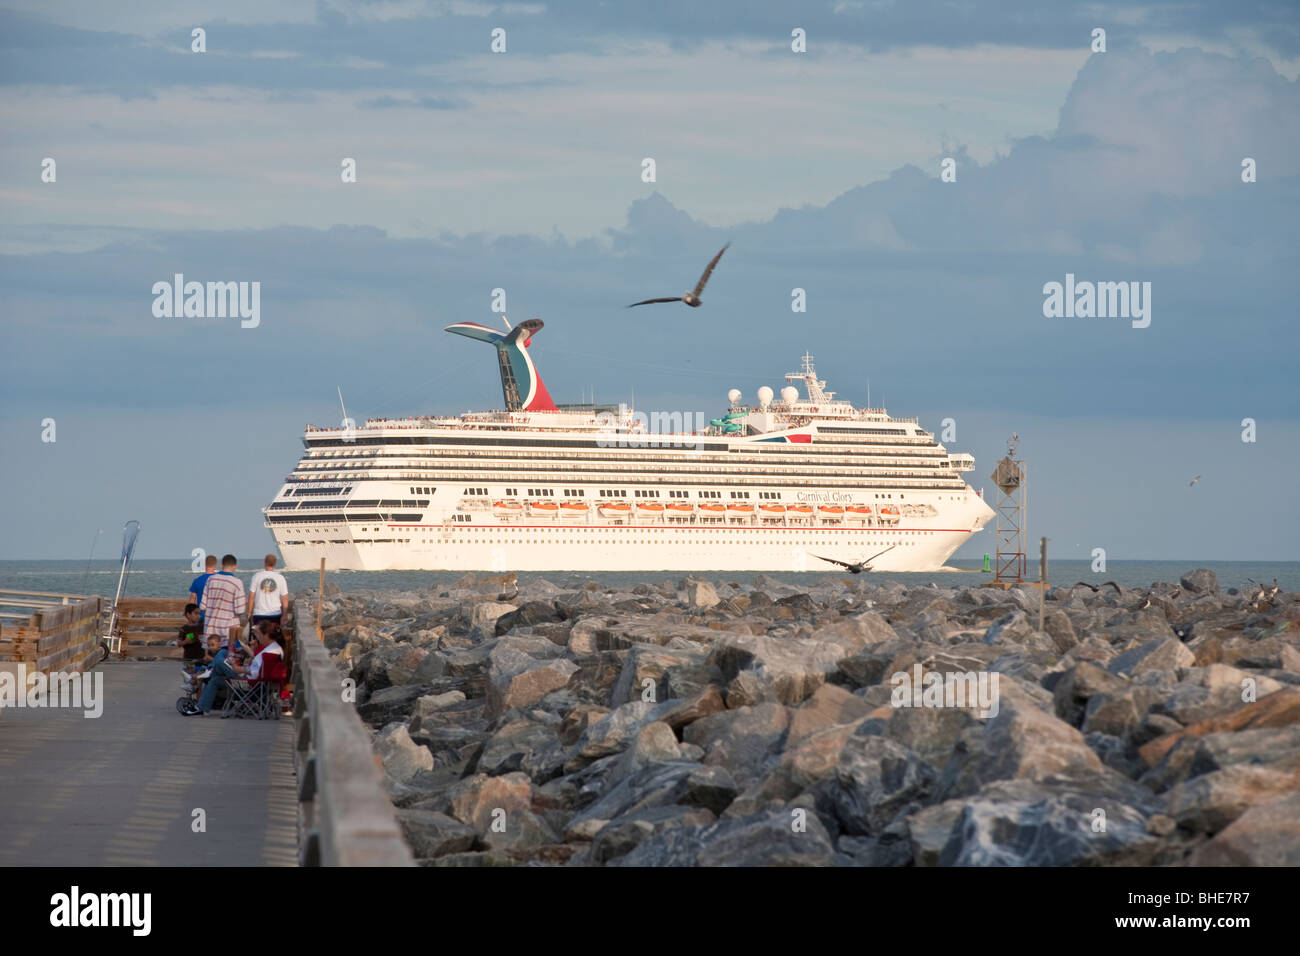 Carnival Glory cruise ship leaving Port Canaveral channel at Jetty Park in Cape Canaveral, Florida Stock Photo